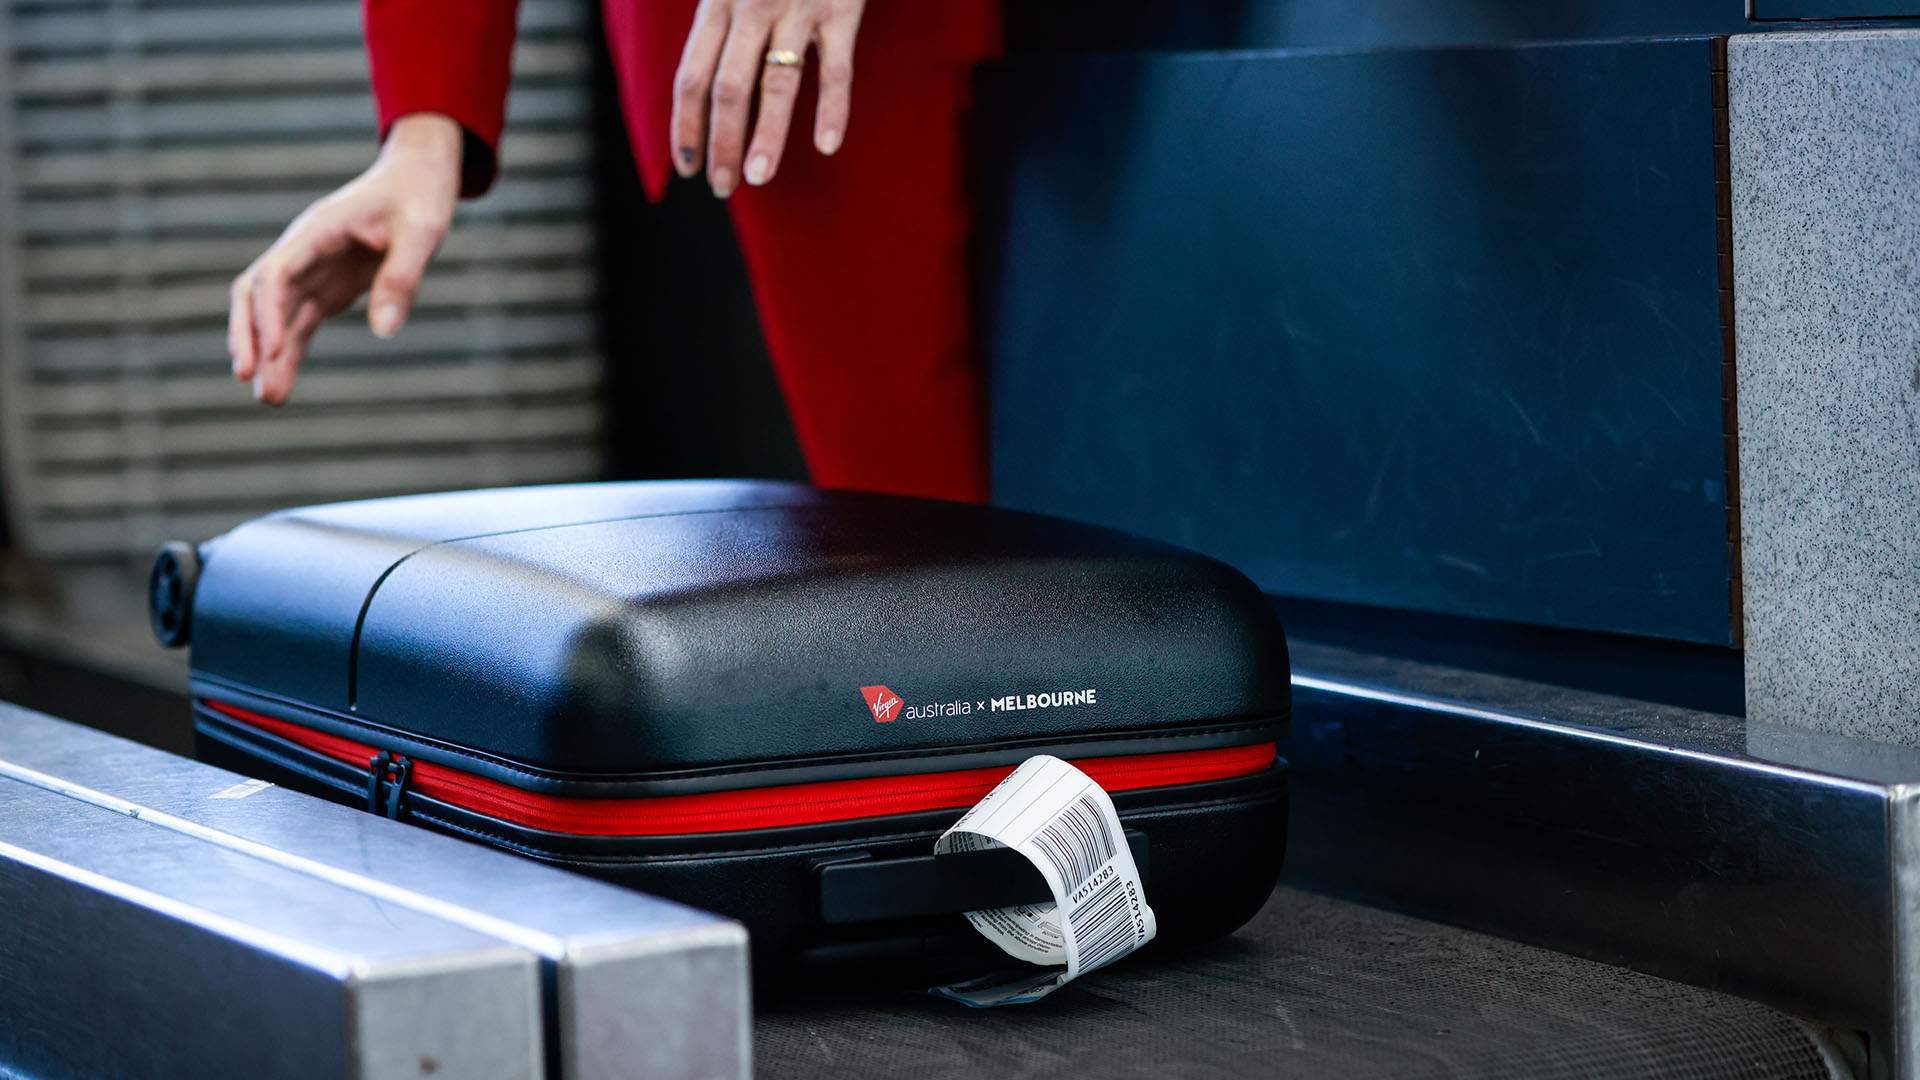 Virgin's Bag Tracking Is Now Available Across the Airline's Entire Domestic and International Network